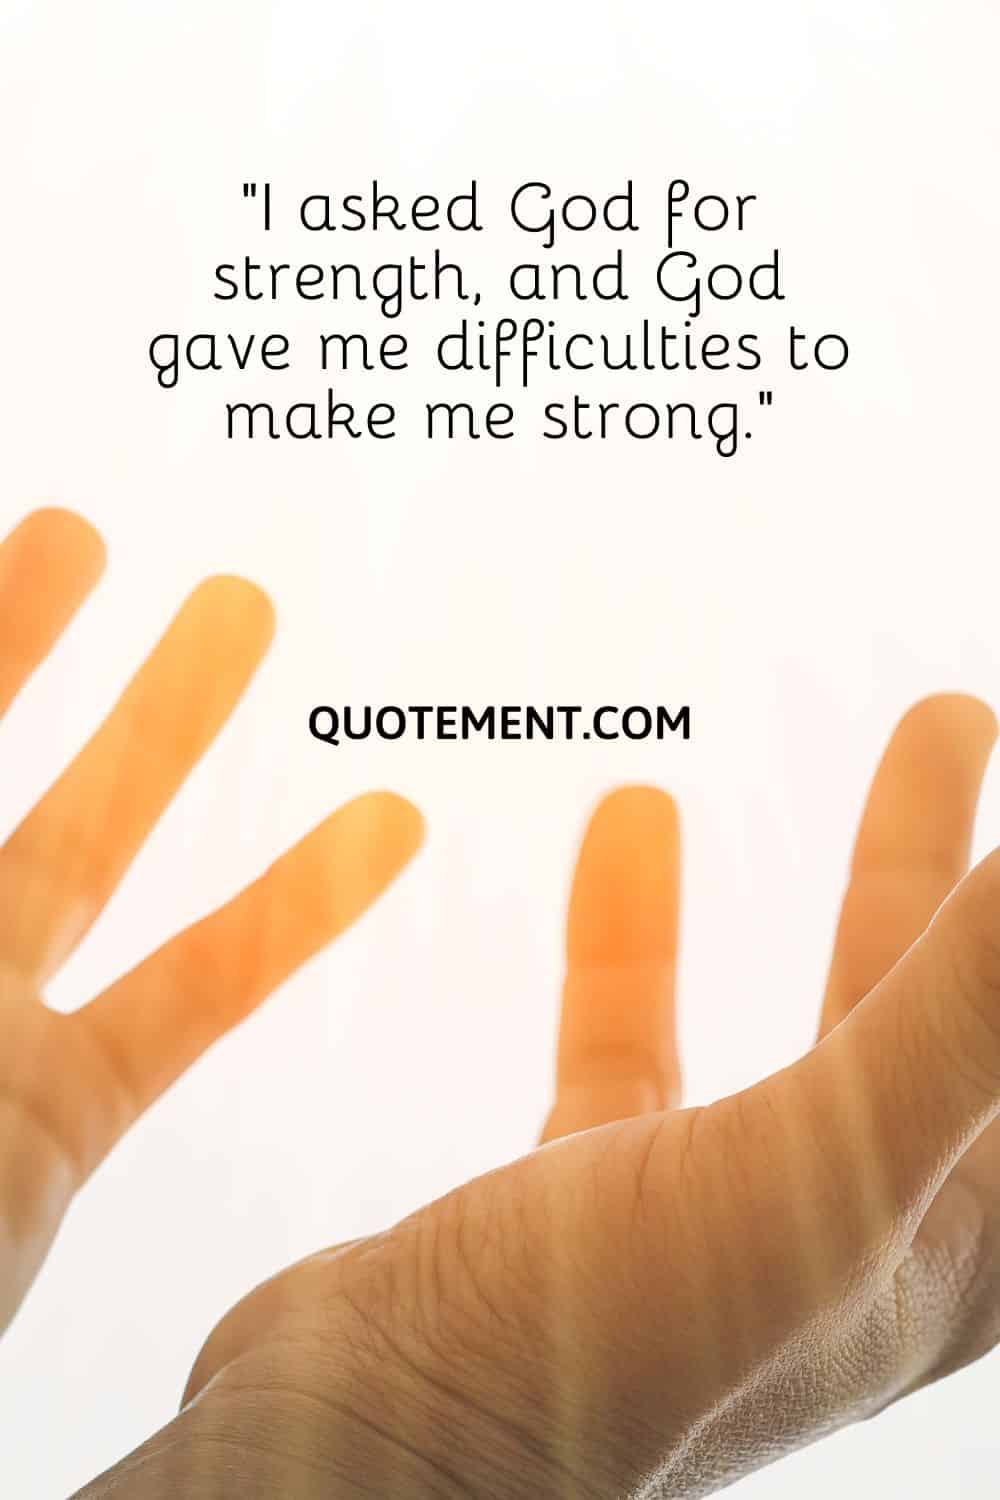 “I asked God for strength, and God gave me difficulties to make me strong.”